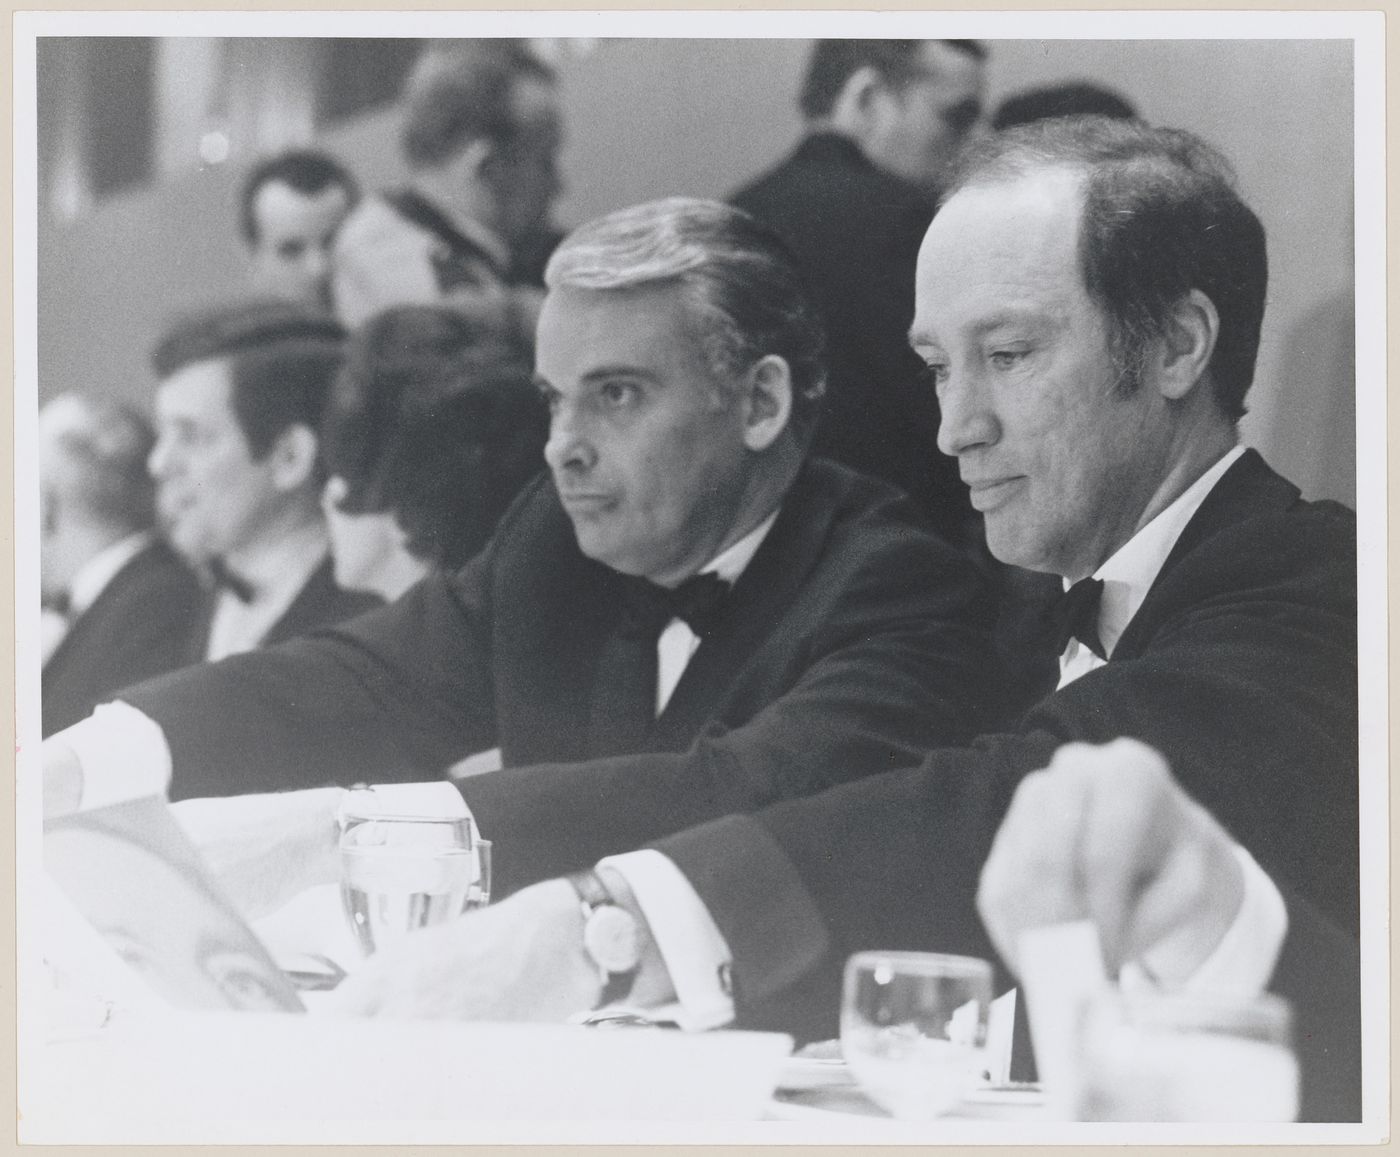 Parkin and Prime Minister Pierre Elliot Trudeau at dinner event